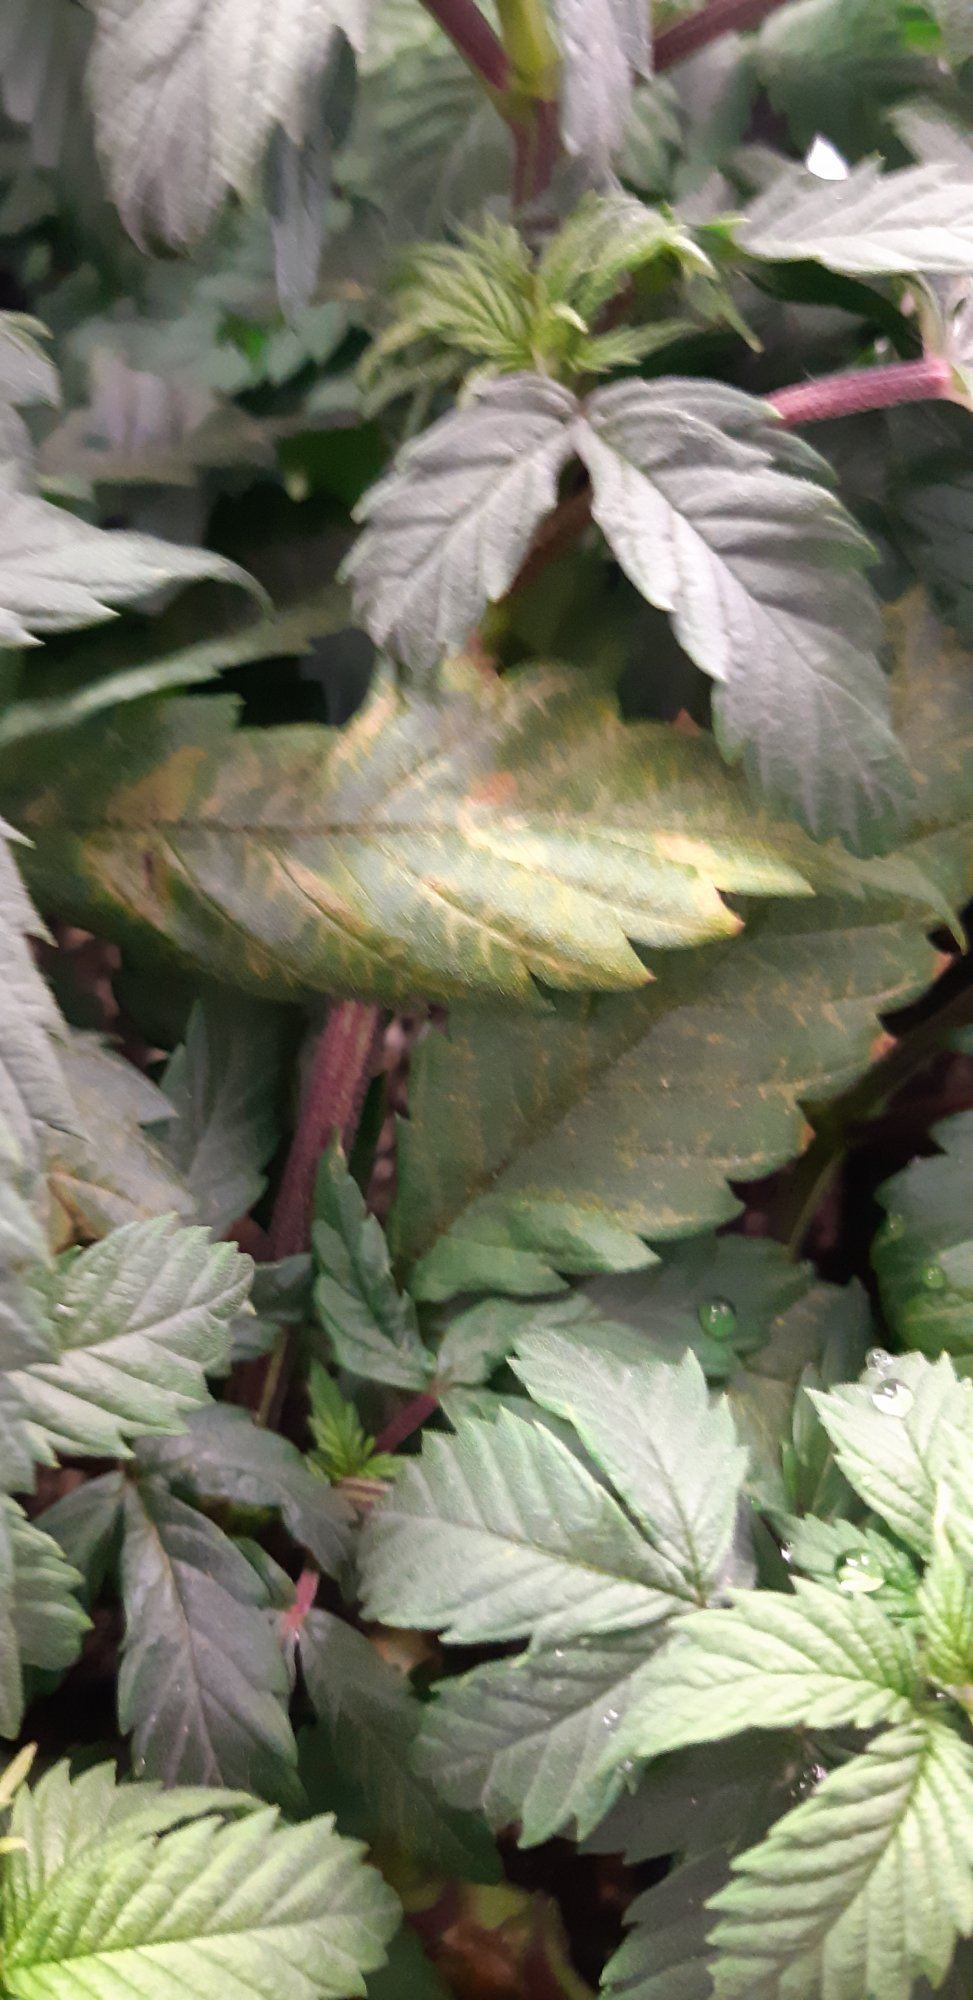 Older leaves starting to yellow